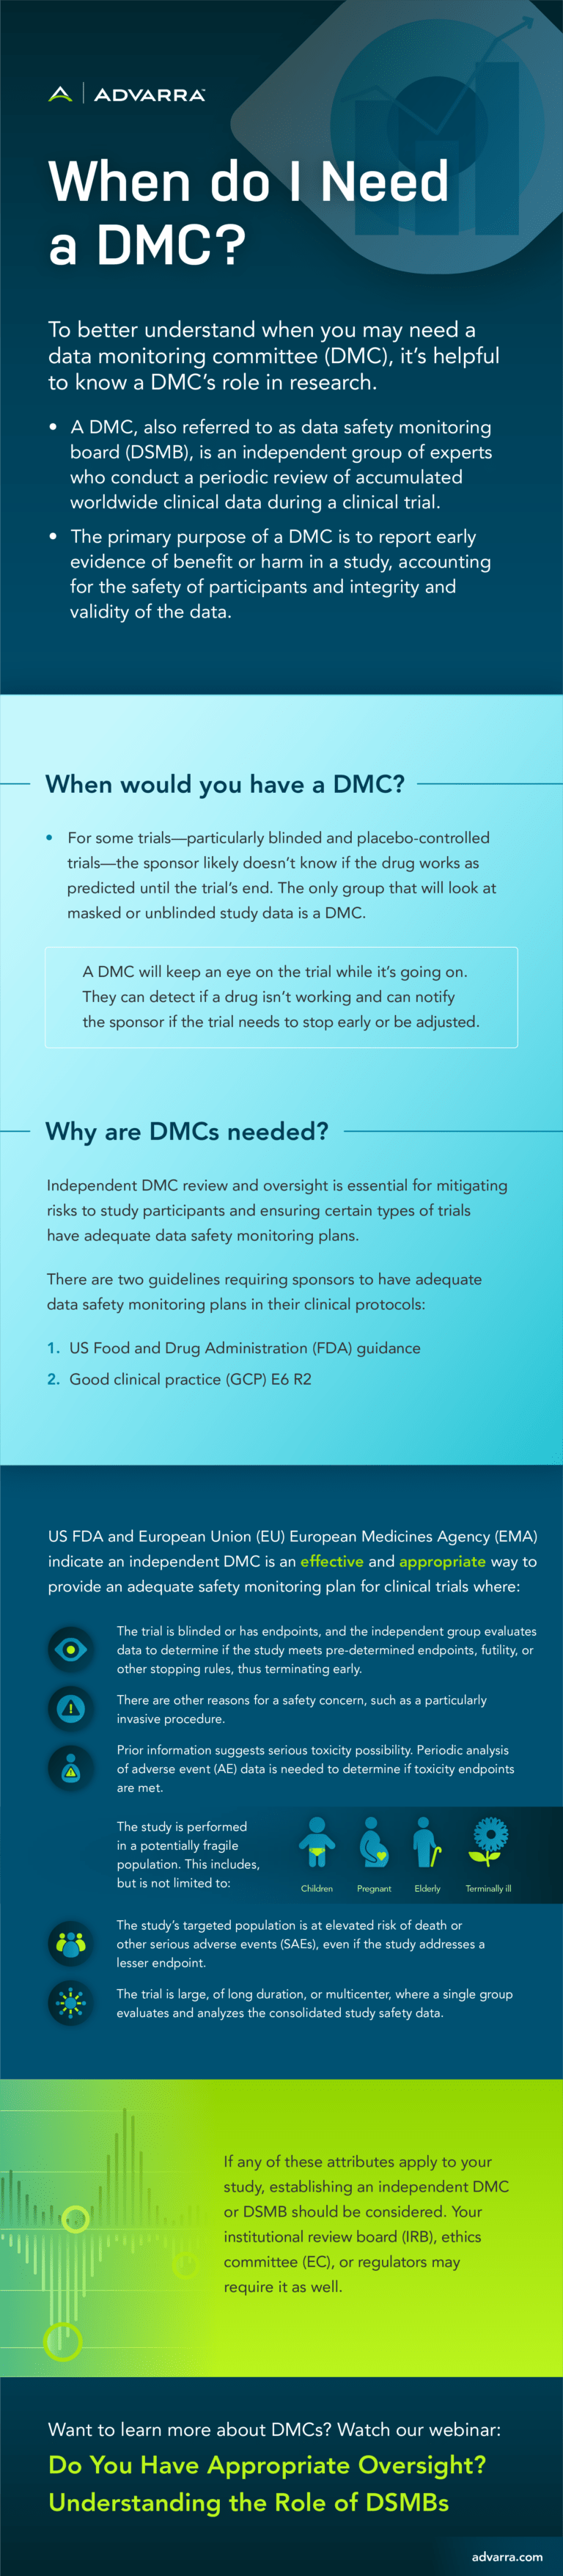 Infographic for When do I Need a DMC? (see full text below)